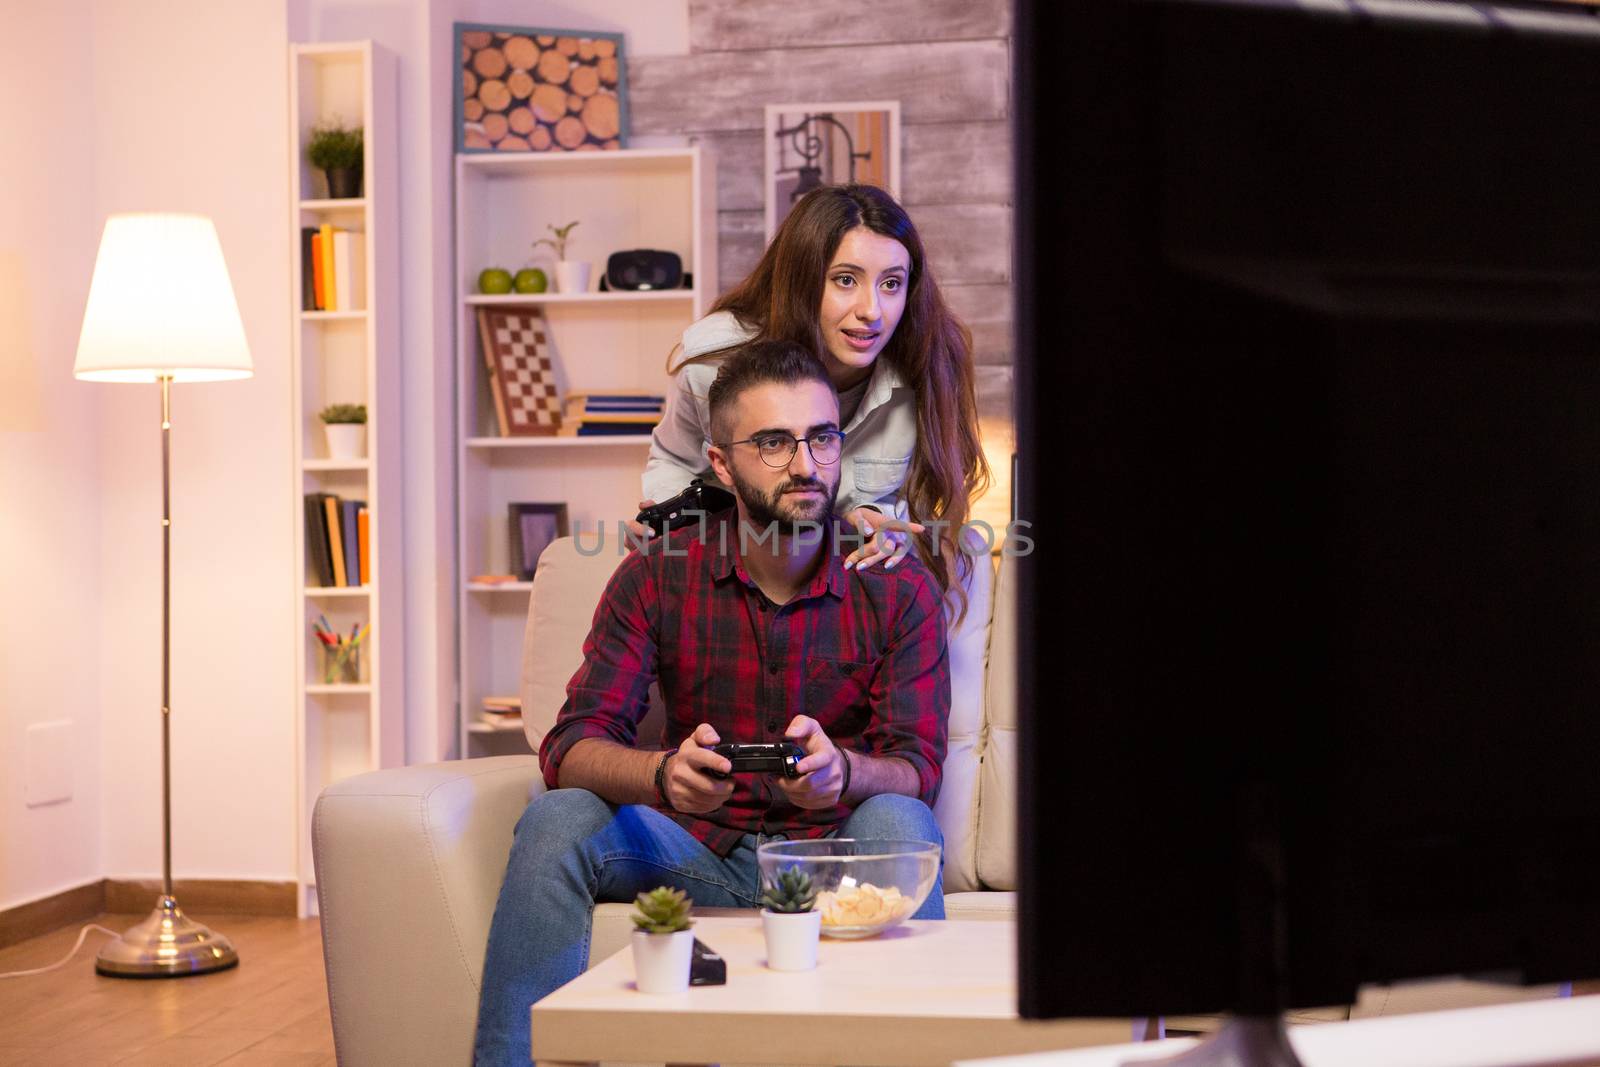 Young couple having fun while playing video games on televison sitting on couch at night.